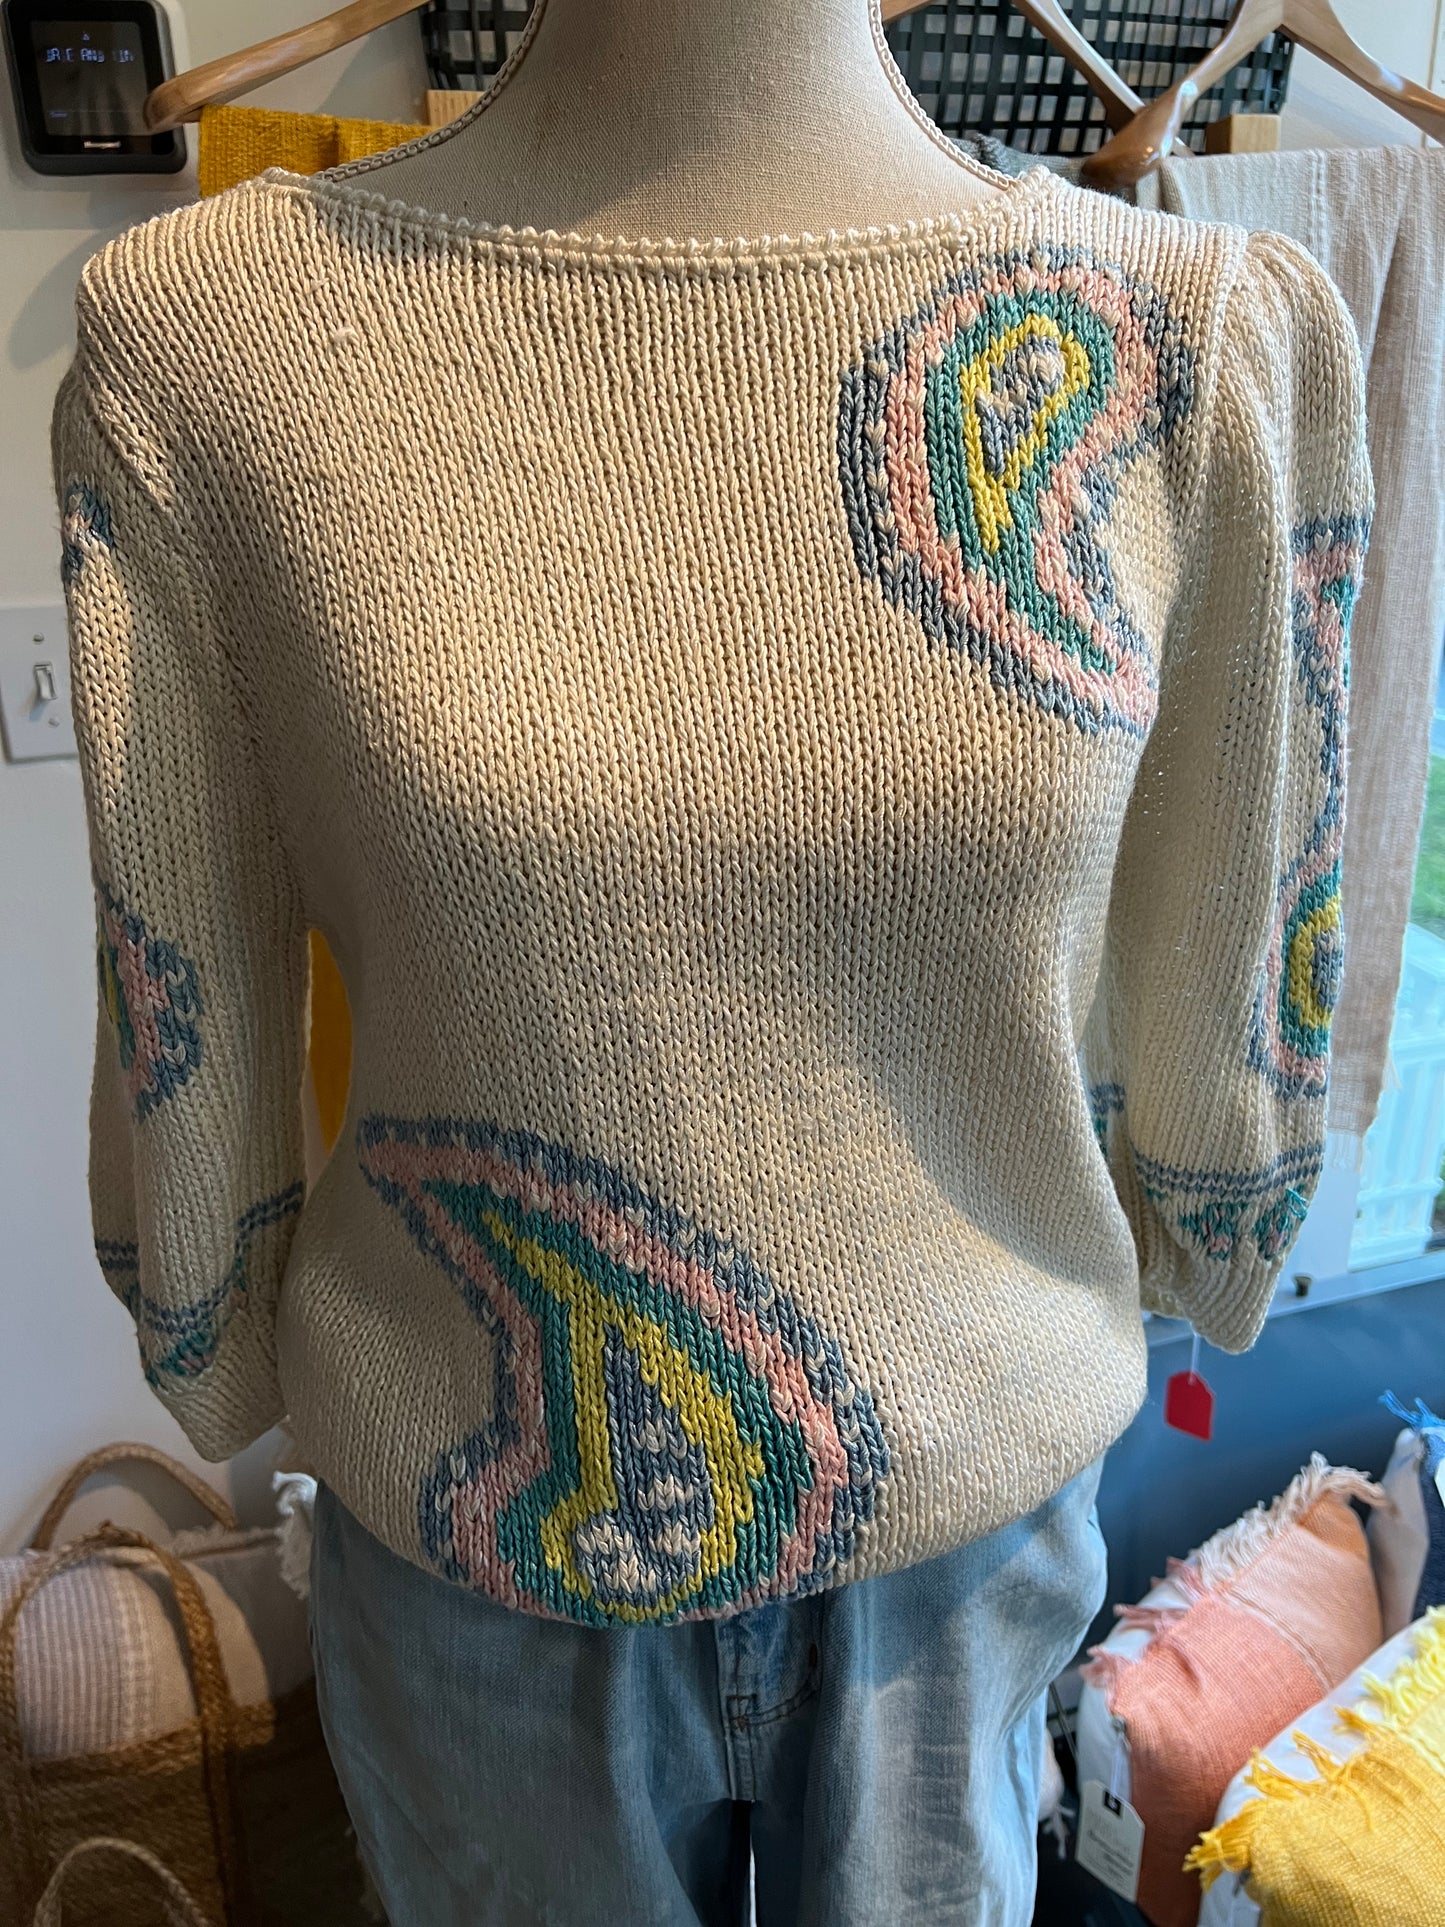 80s vintage sweater #2- pastel paisley with pads